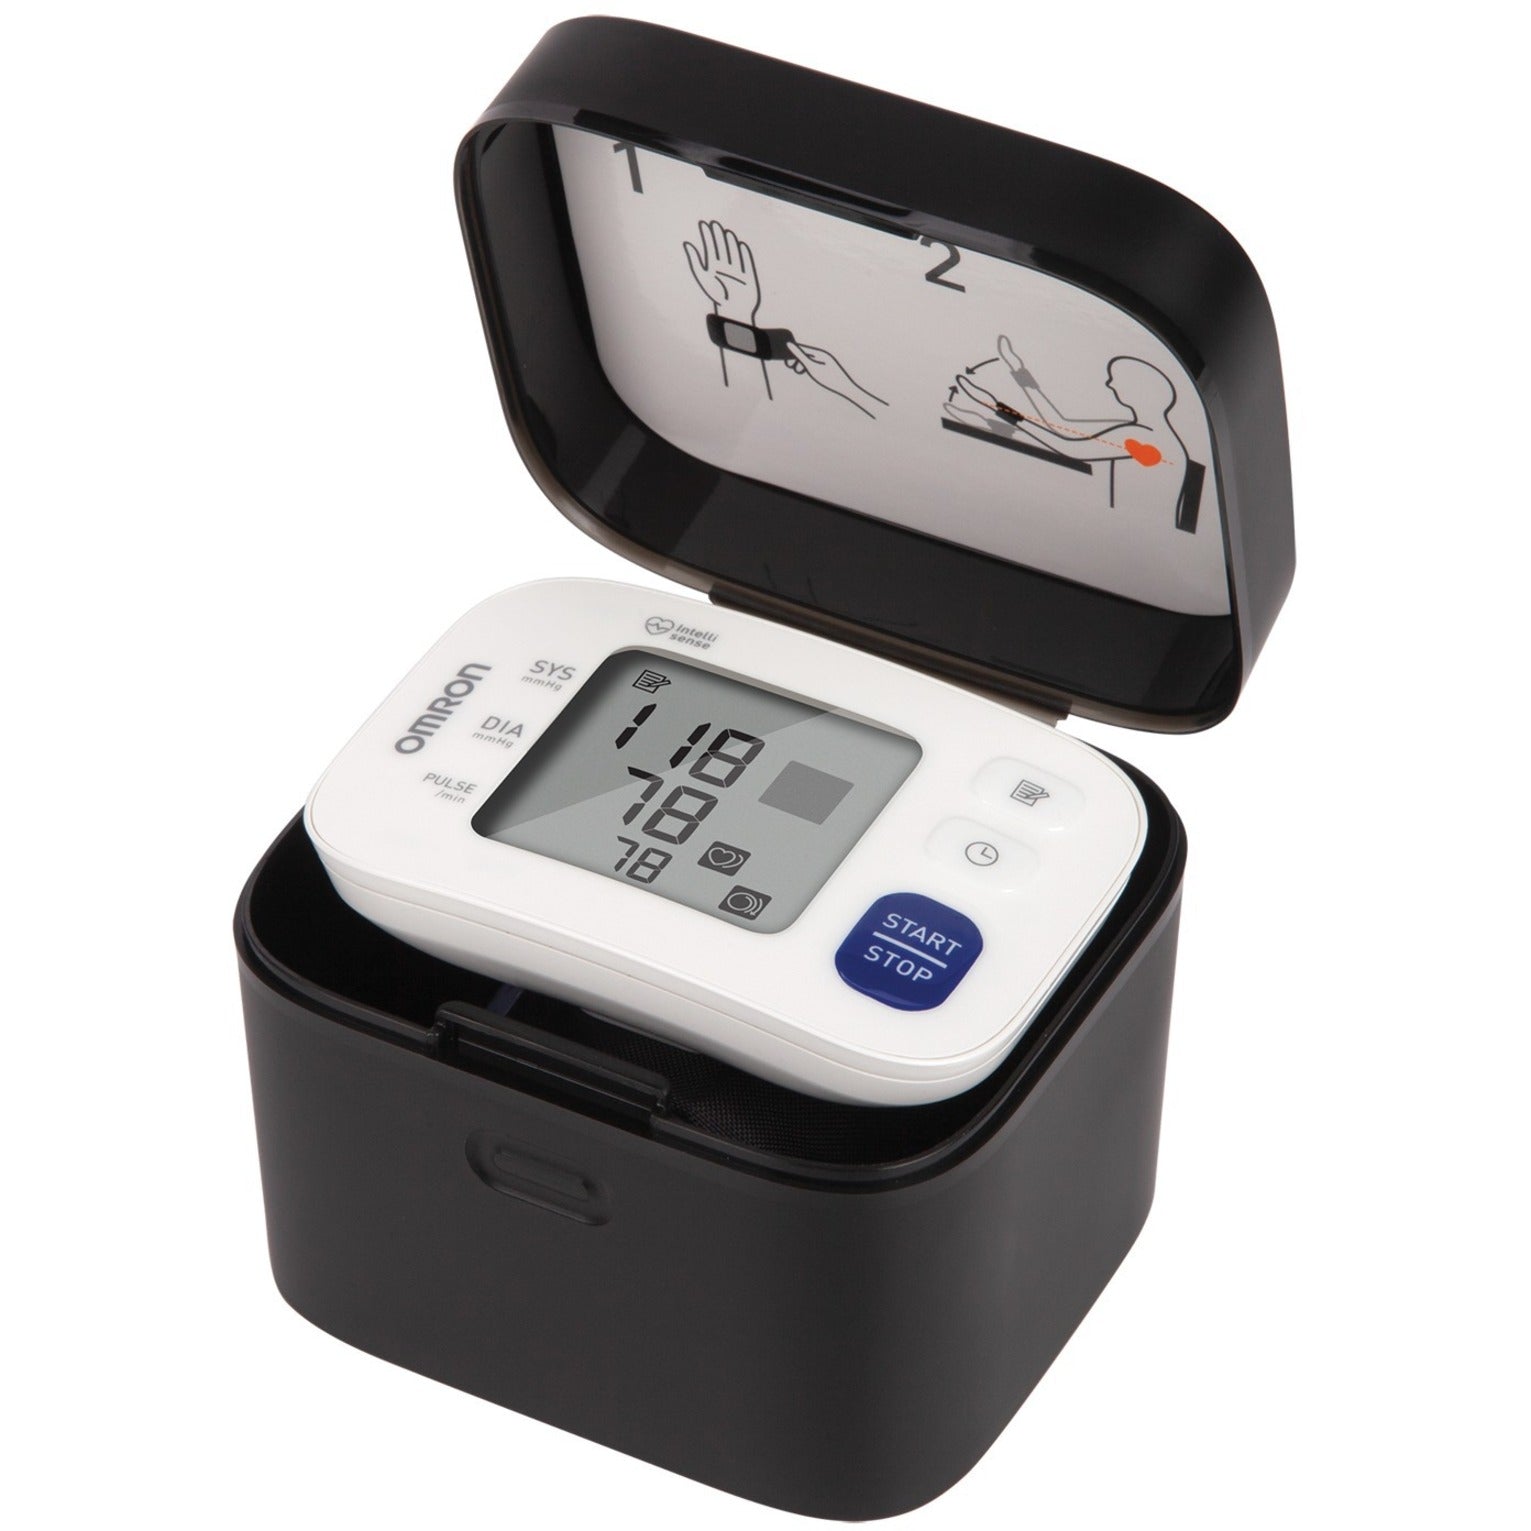 Omron BP6100 3 Series Wrist Blood Pressure Monitor, Memory Storage, Easy-to-read Display, Bluetooth Connectivity